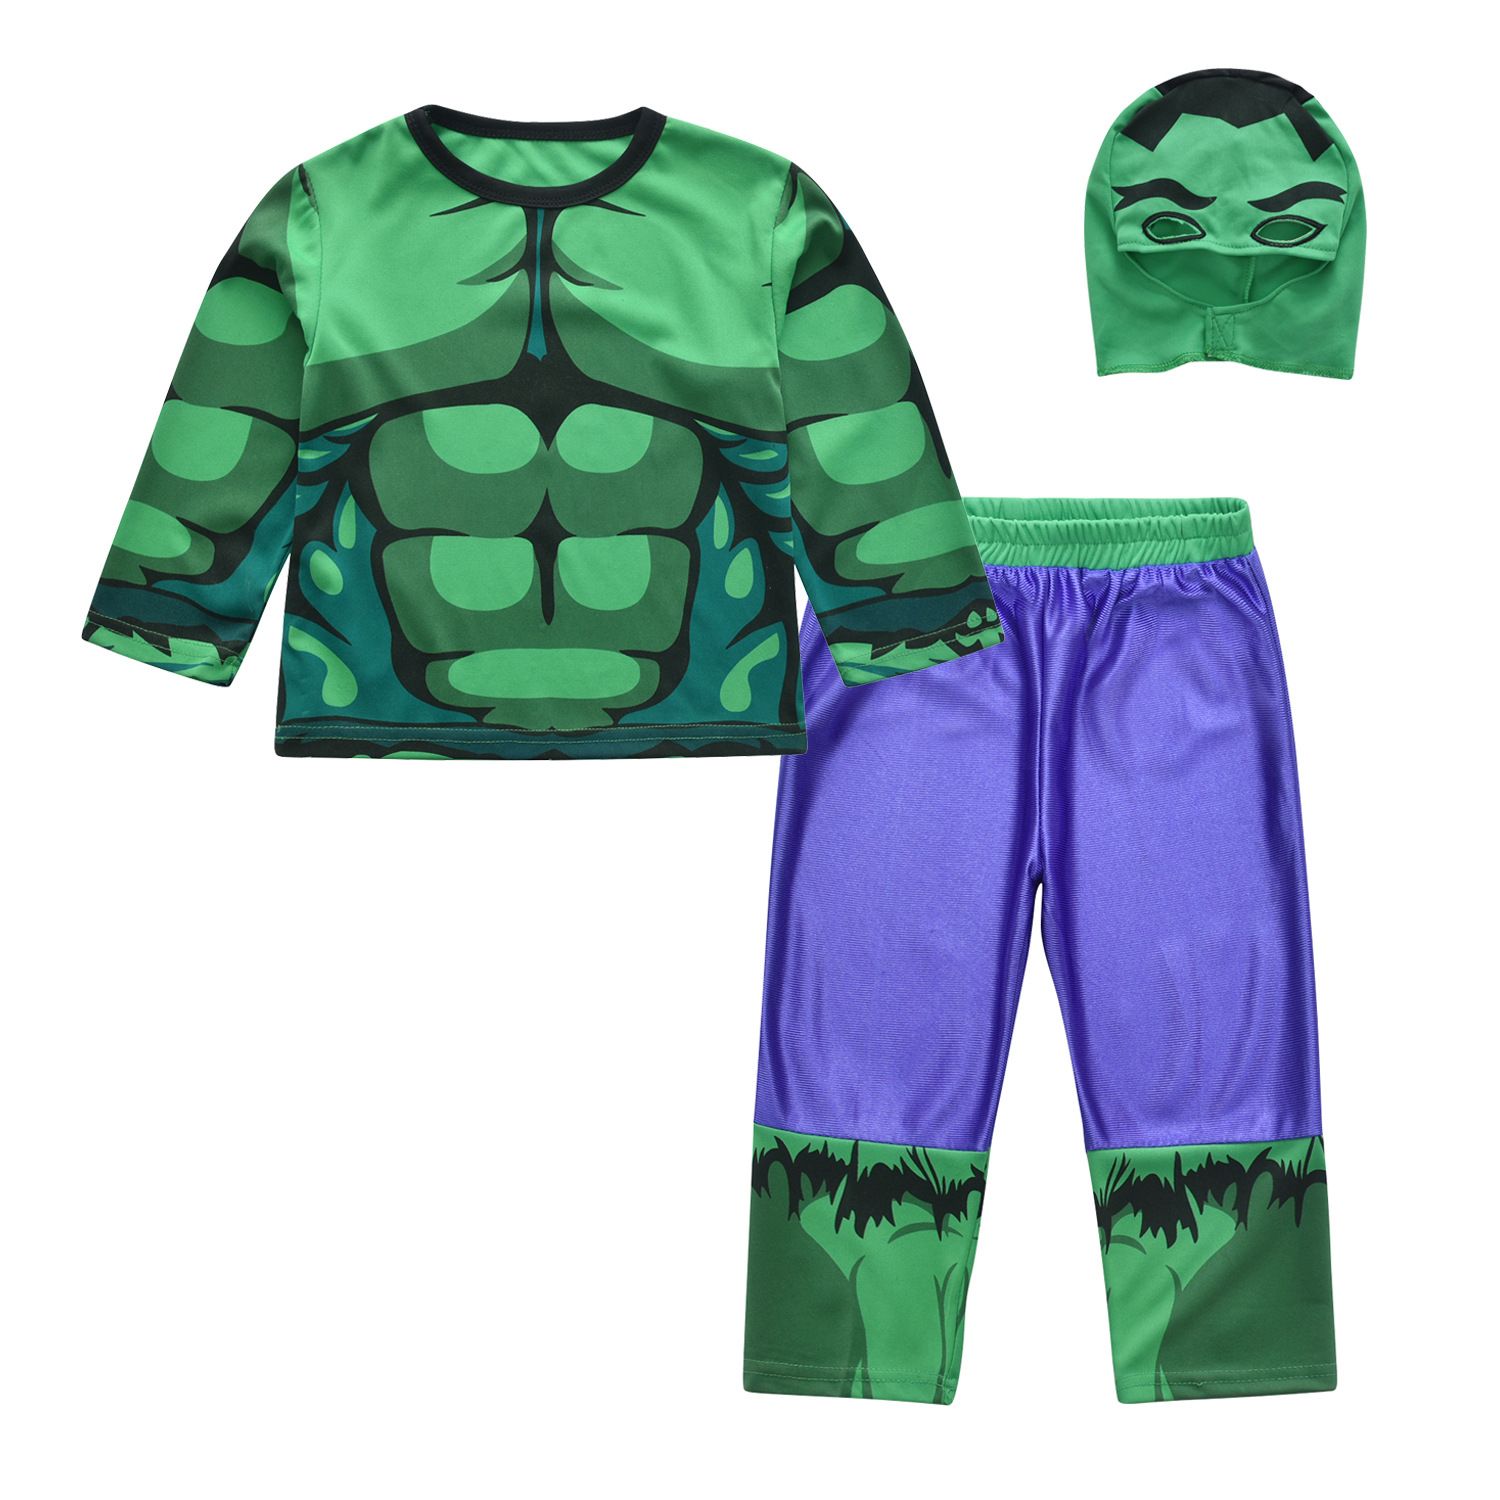 Hulk Green Polyester Muscle Costume With Mask And Shredded Shorts, 3 - 5 Years